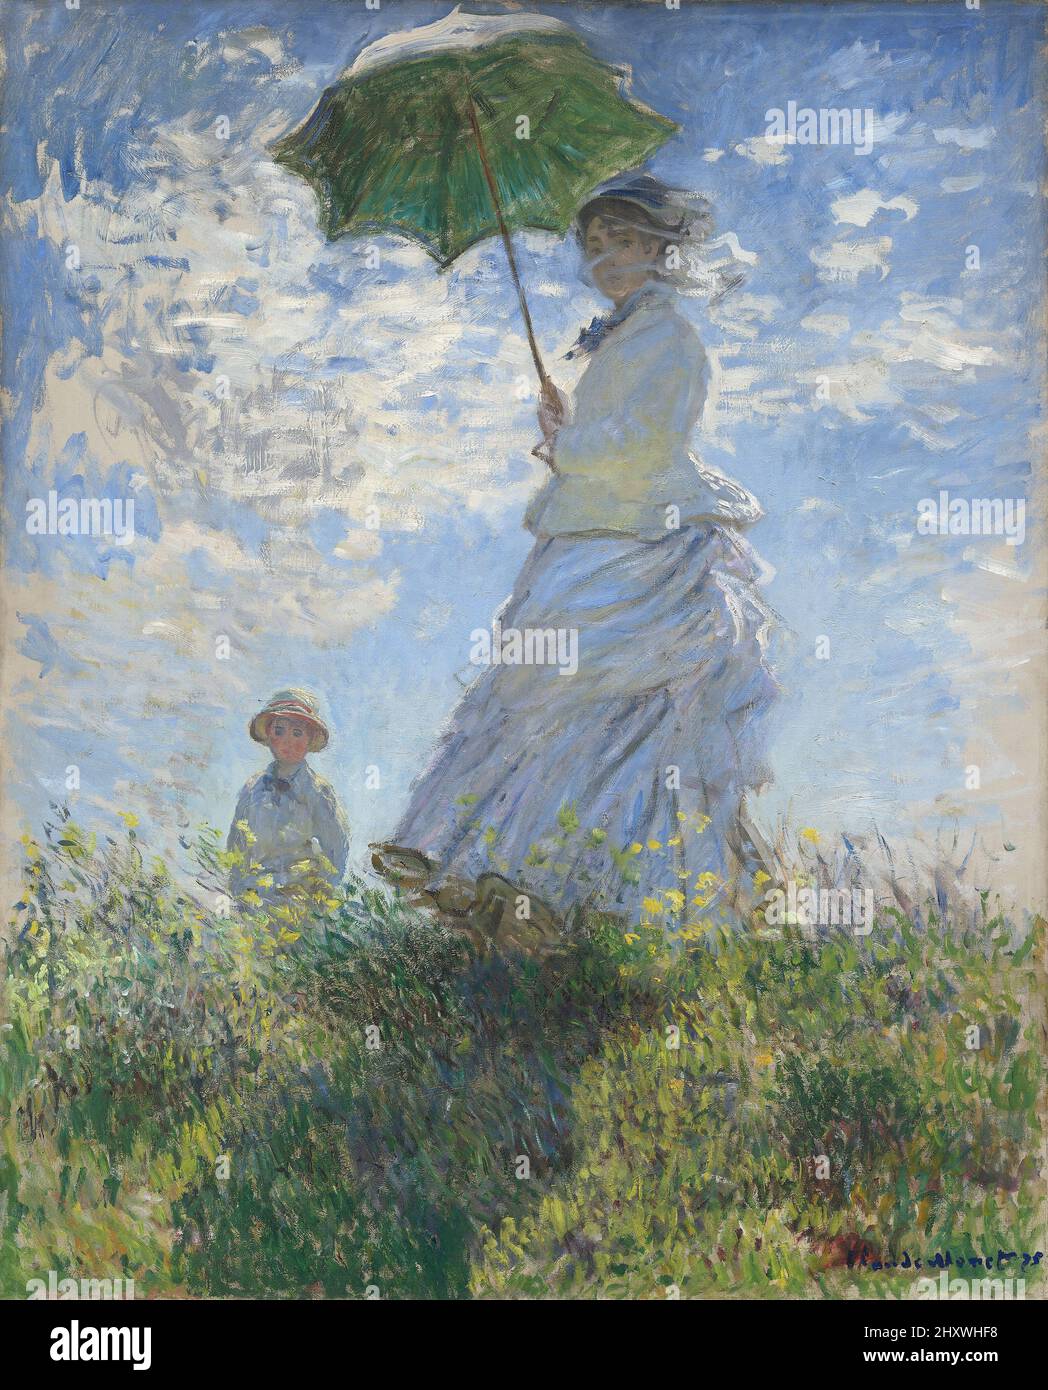 Woman with a Parasol - Madame Monet and Her Son oin on canvas painting created by impressionist Claude Monet in 1875 Stock Photo